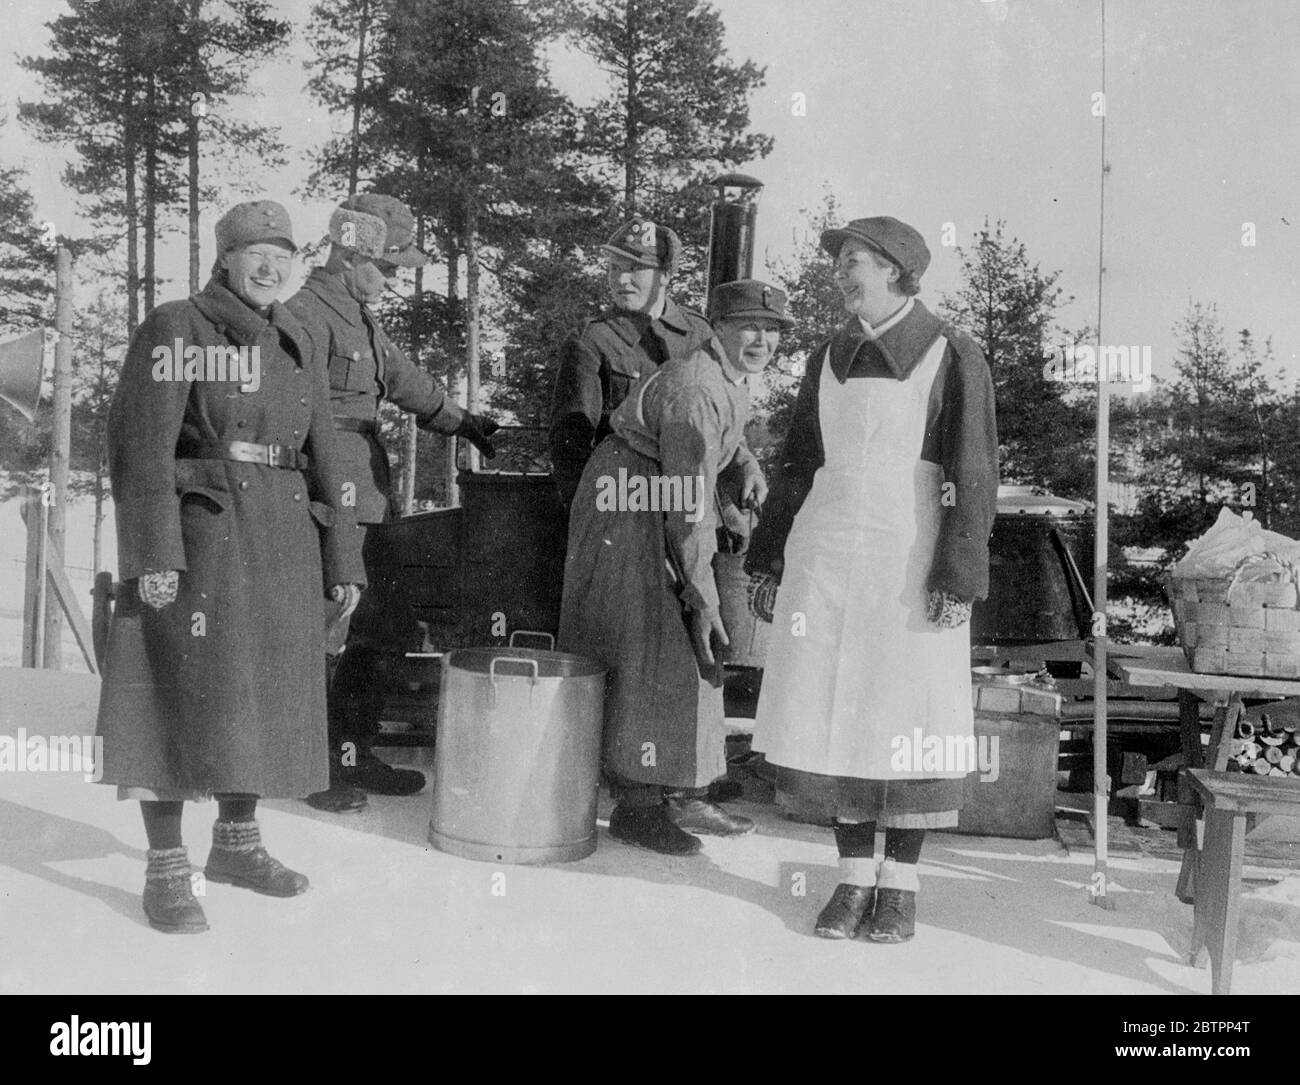 Women 'soldiers' of Finland. They cook at a Field Kitchen!. Military uniformed members of 'Lottas', the Finnish women's patriotic organisation, use a field kitchen to fulfil the feminine duty or preparing food for competitors in the world skiing Championships at Lahti, Finland. One of the women is wearing an apron over her greatcoat. 26 February 26 1938 Stock Photo